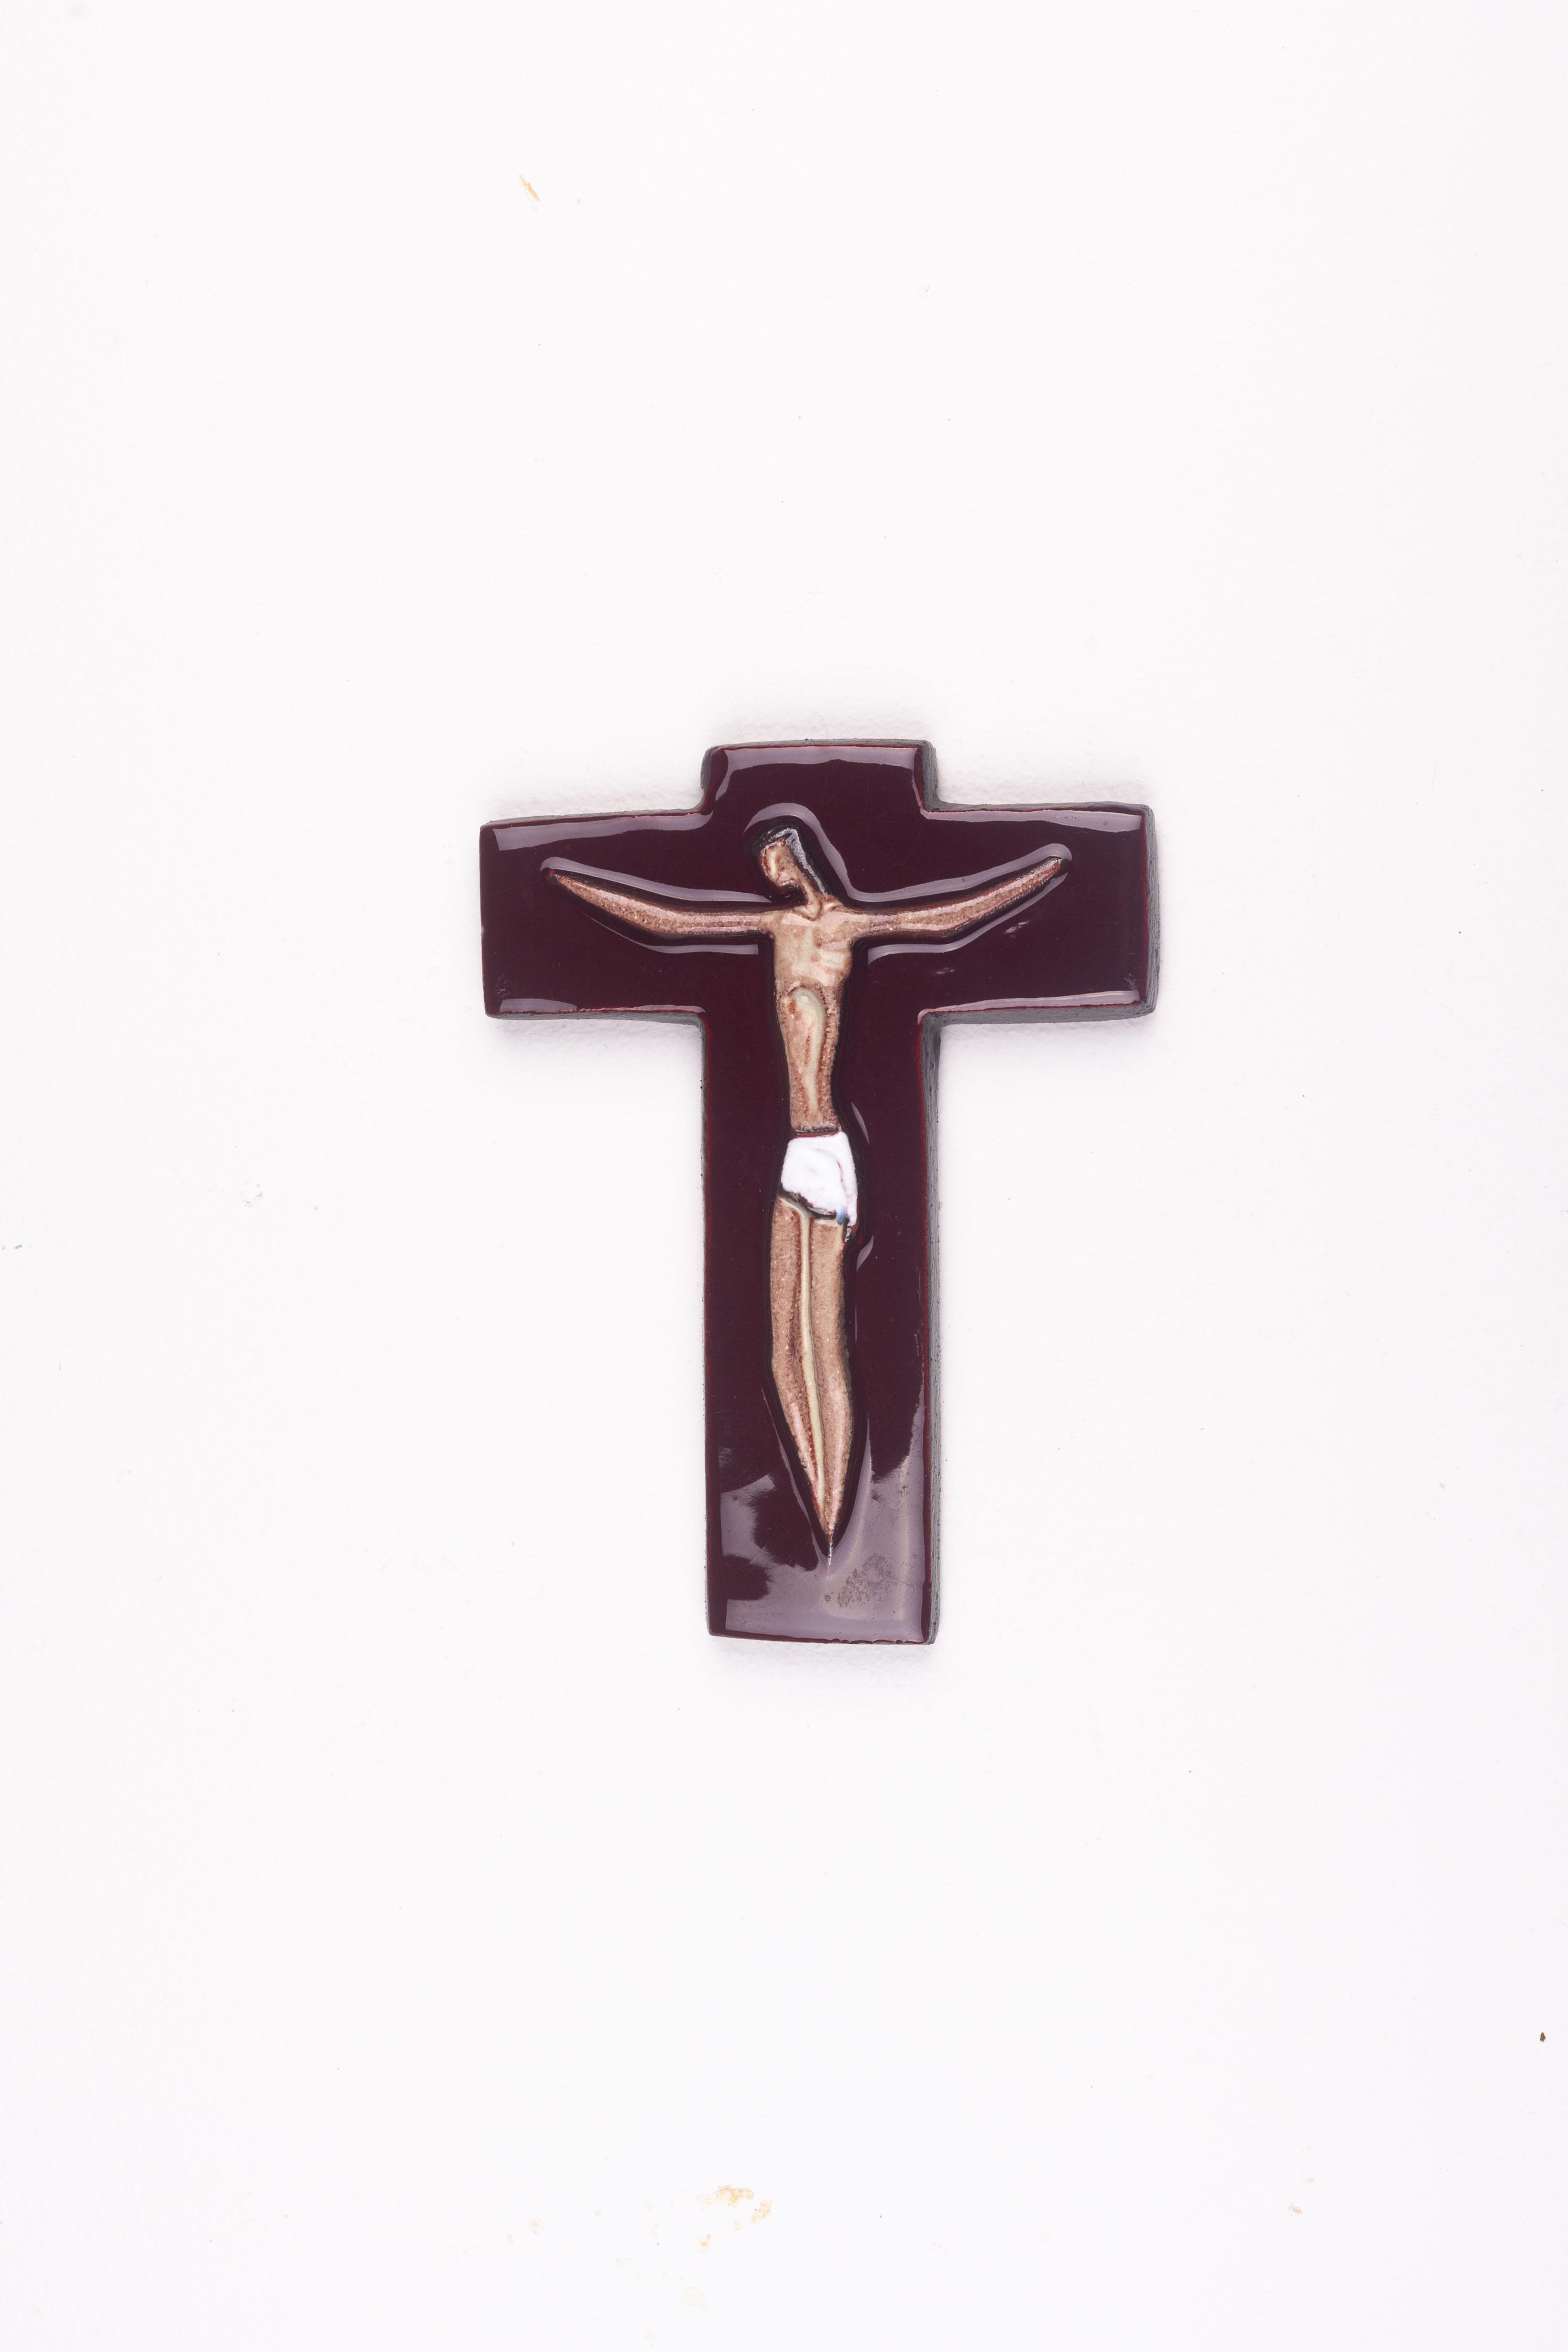 Crafted by Flemish artisans, this midcentury religious cross has a burgundy glossy glaze and sinewy Christ figure at its center. Rendered in fluid lines, the interplay of these with the glossy burgundy glaze, earth tones, and white swath creates a